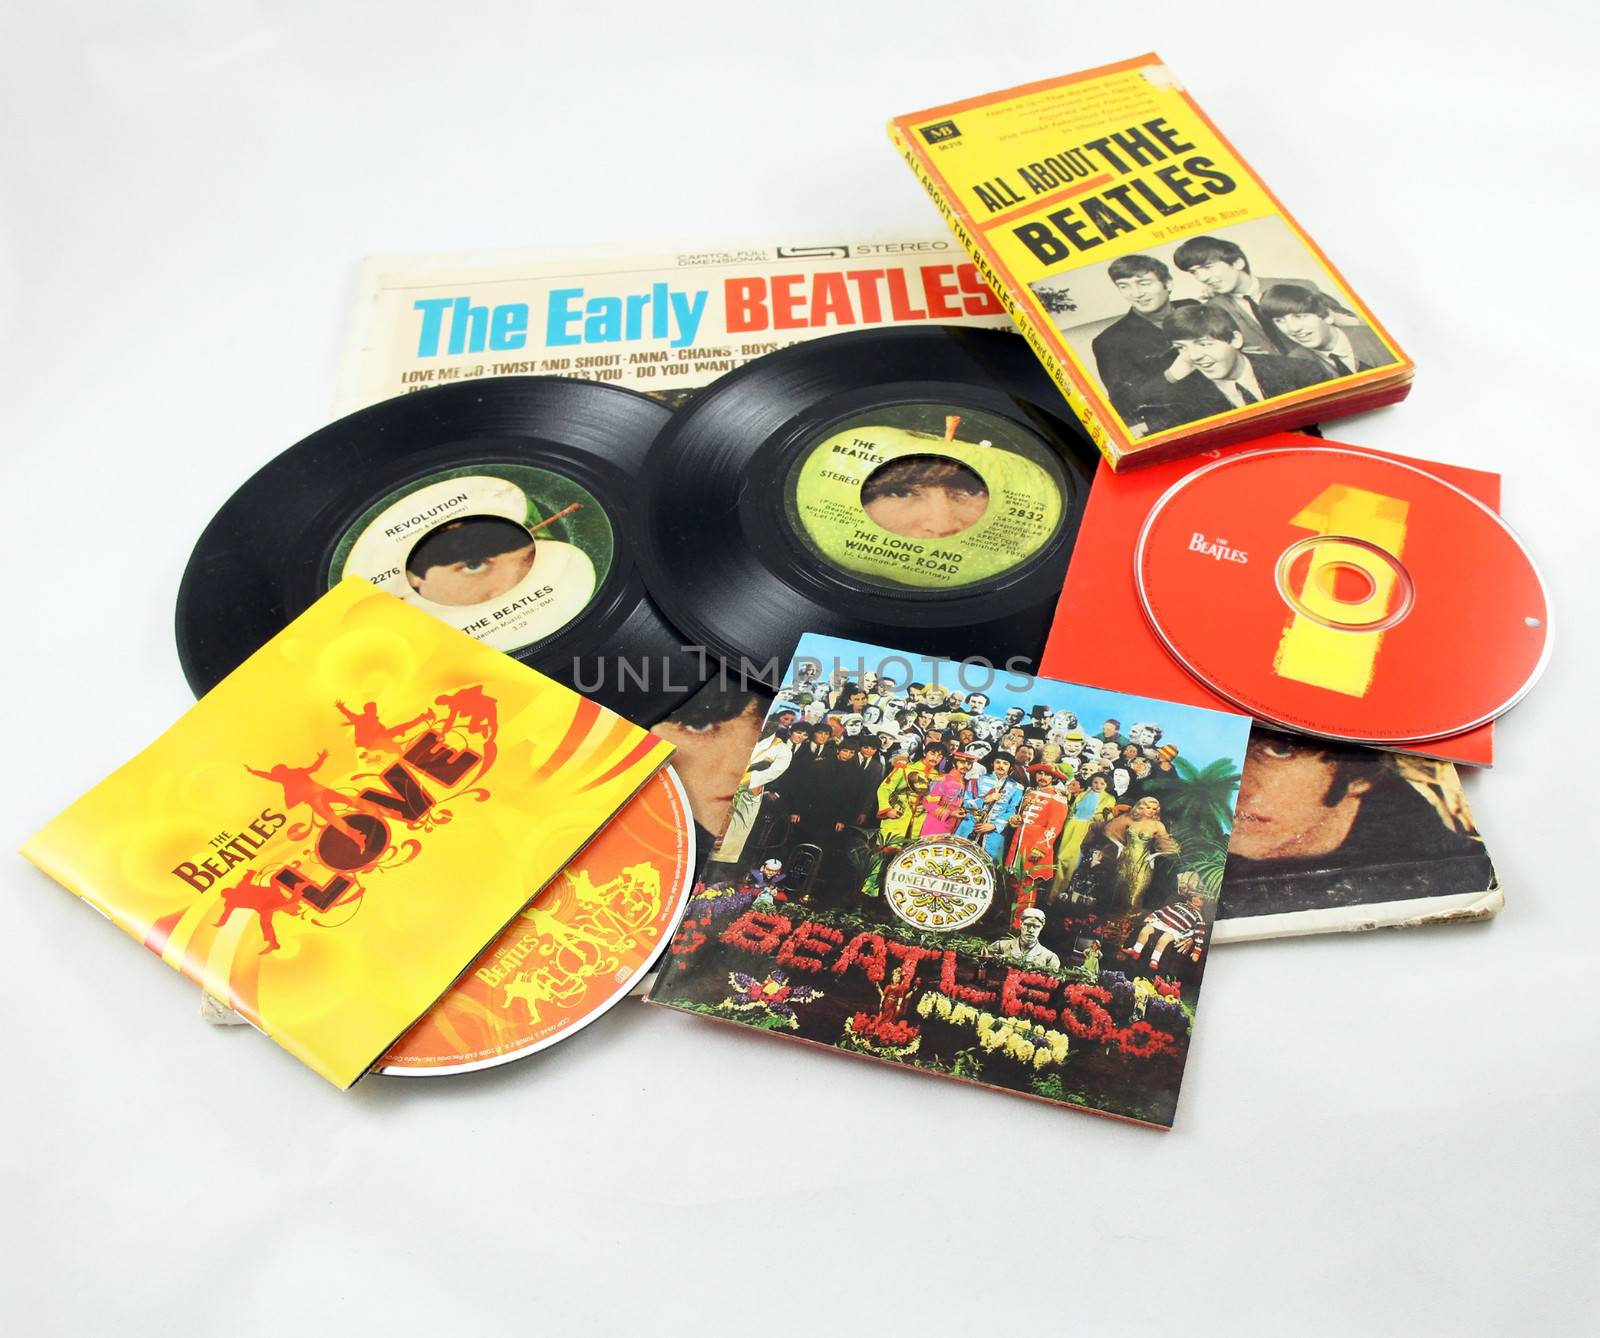 FRISCO, TX - February 8, 2014: Beatles LP, singles, CDs and book. The band marks its 50th anniversary appearance on the Ed Sullivan show Sunday, Feb. 9, 2014. They arrived on the American scene in 1964. McCartney and Ringo are the only two surviving members.